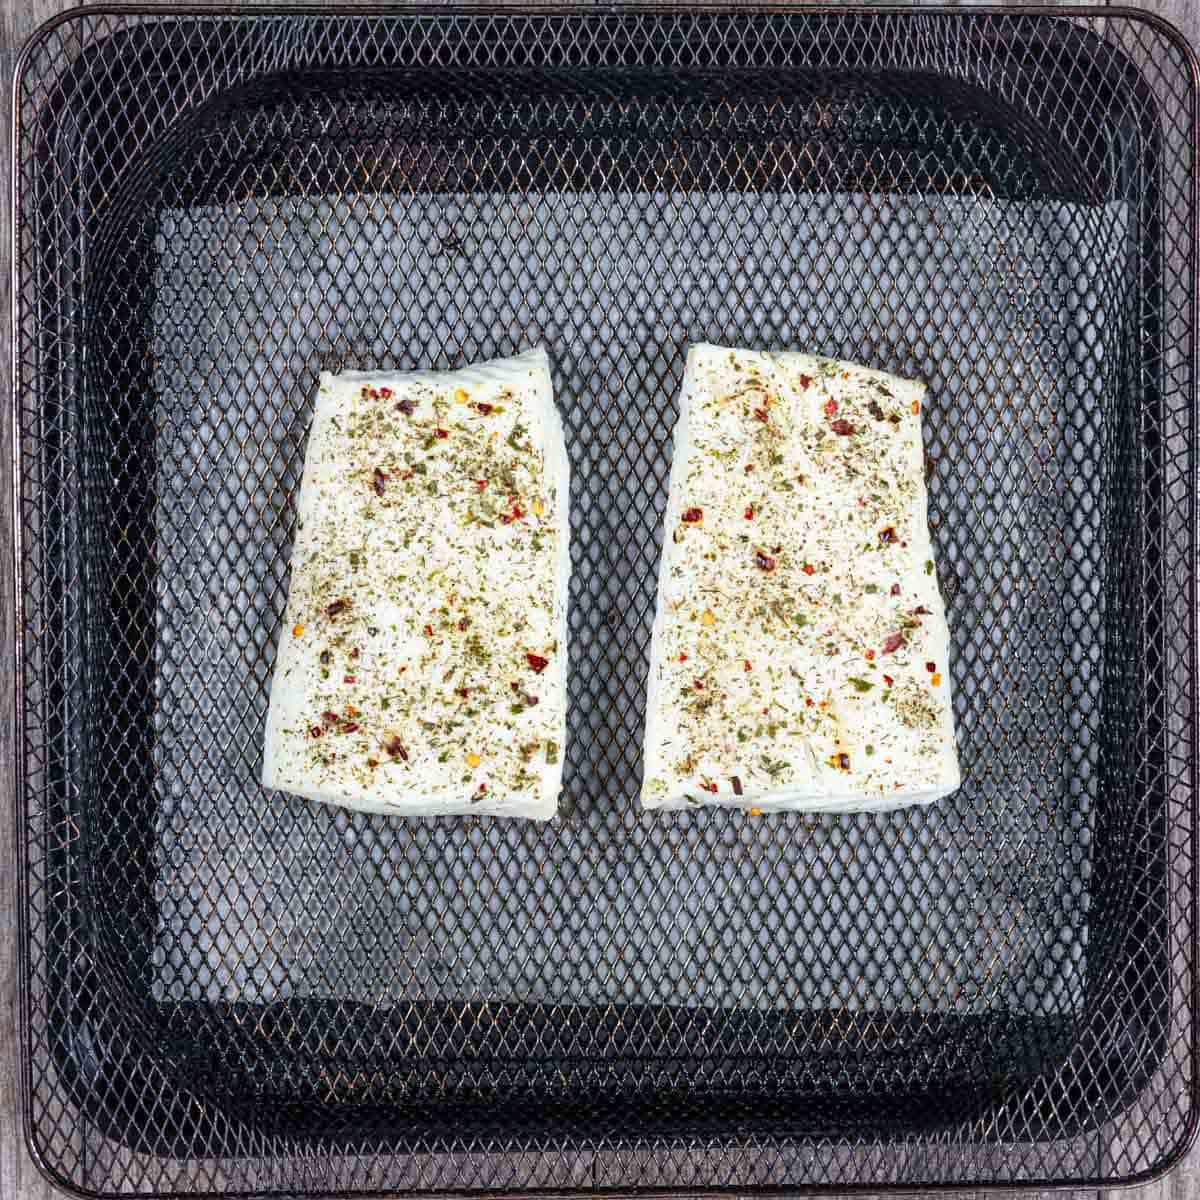 Halibut filets seasoned and fully cooked in air fryer basket.